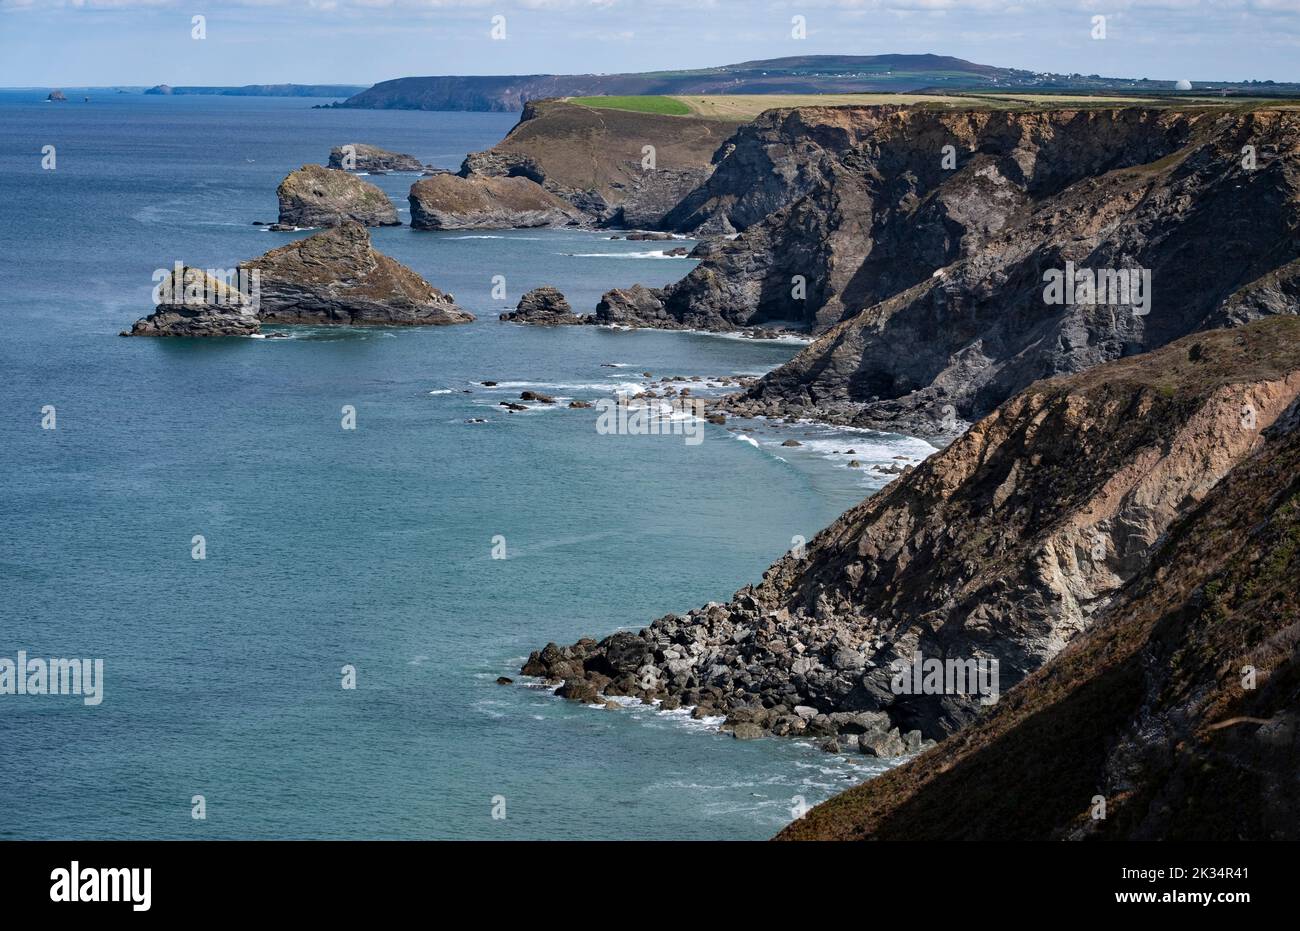 A view of the rugged north Cornwall coastline near Portreath showing the Crane and Samphire Islands, England. Stock Photo